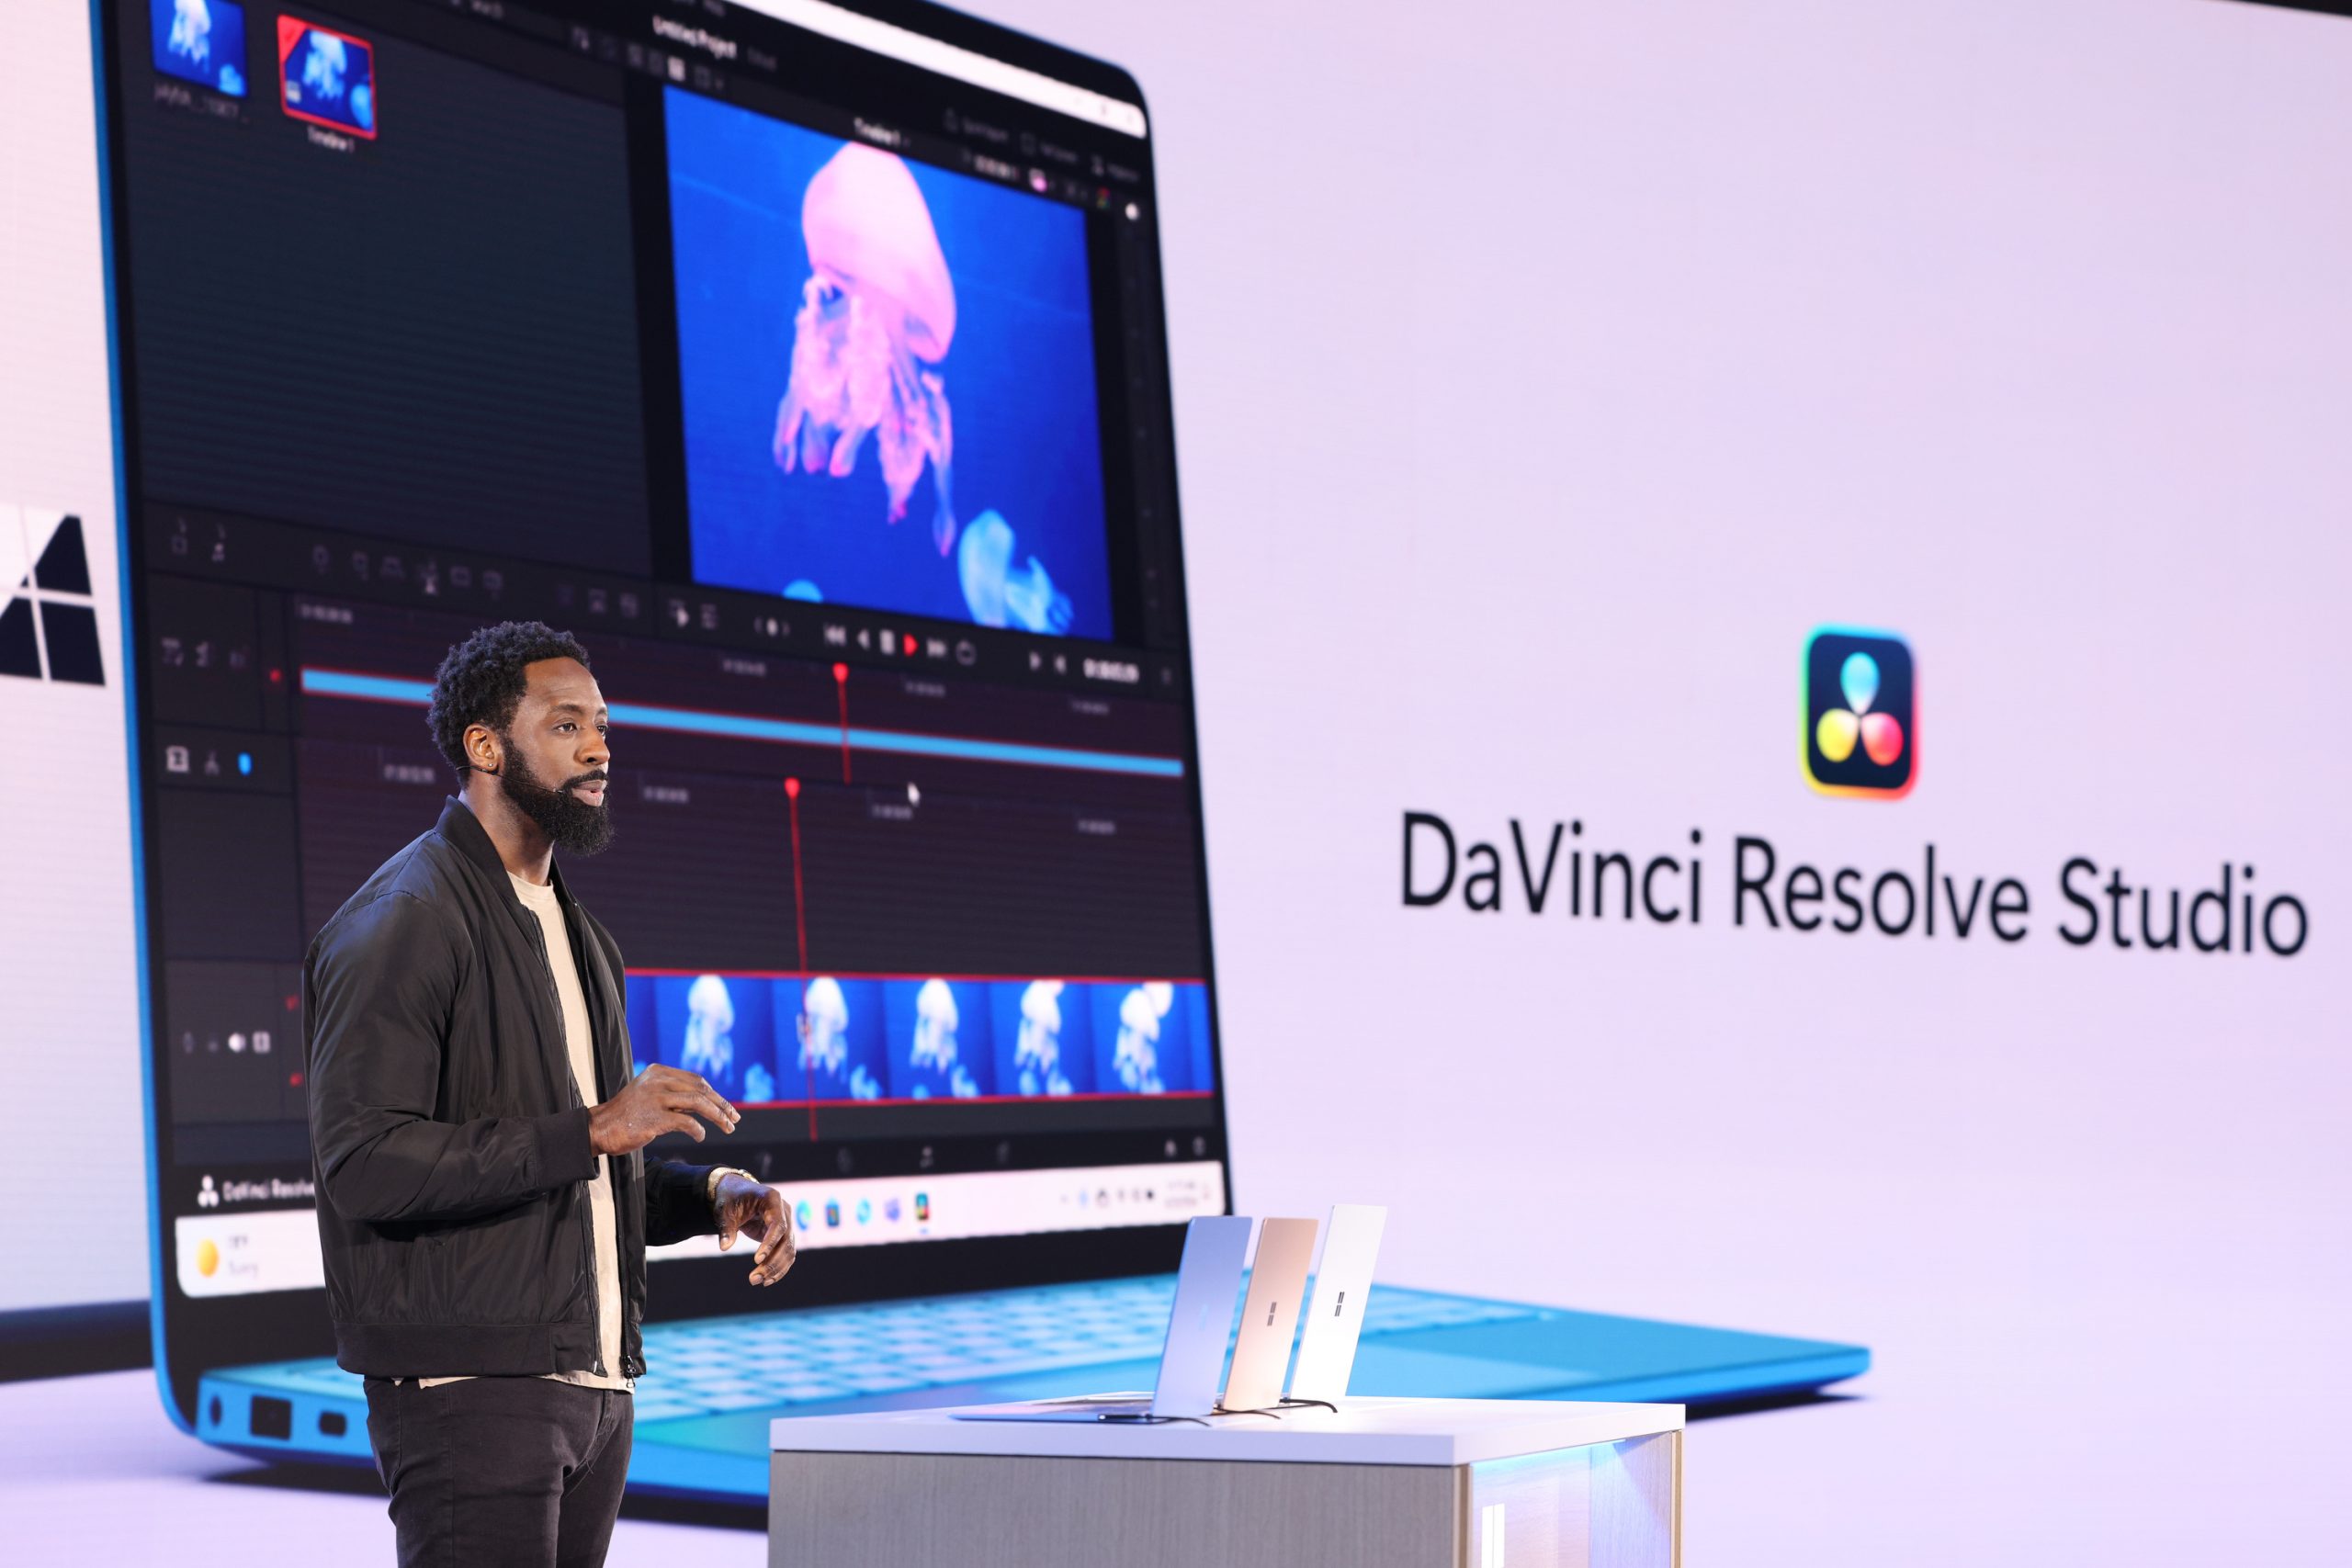 A man standing on stage in front of an audience with a laptop demonstrating DaVinci Resolve Studio projected onto the screen behind him